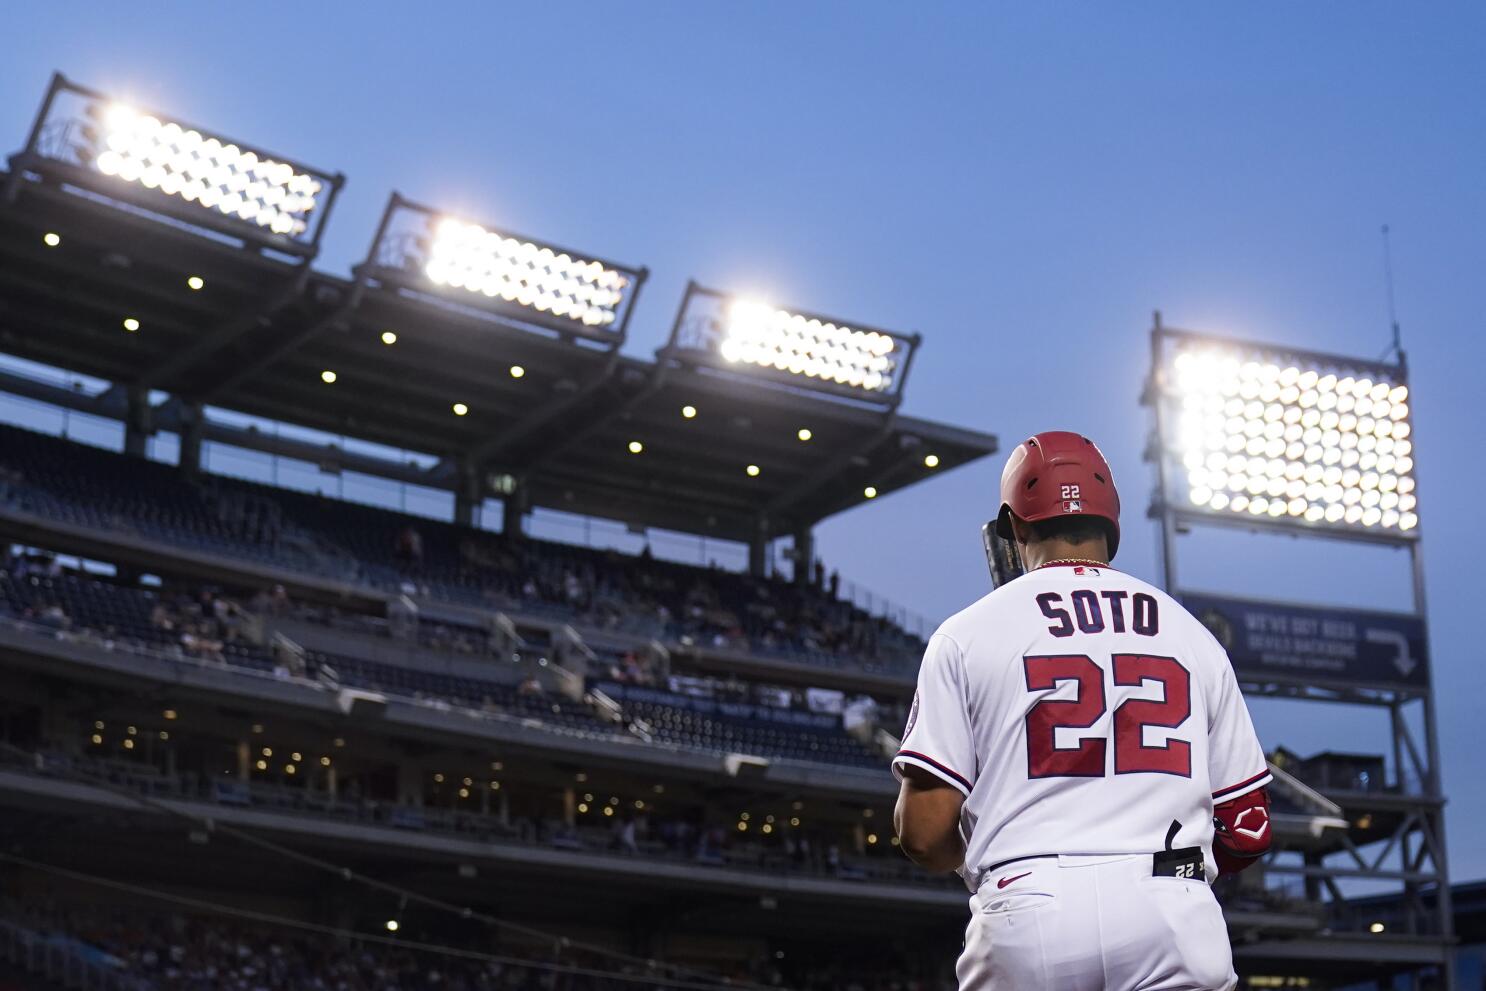 Shaikin: Padres land another bolt of excitement in San Diego by